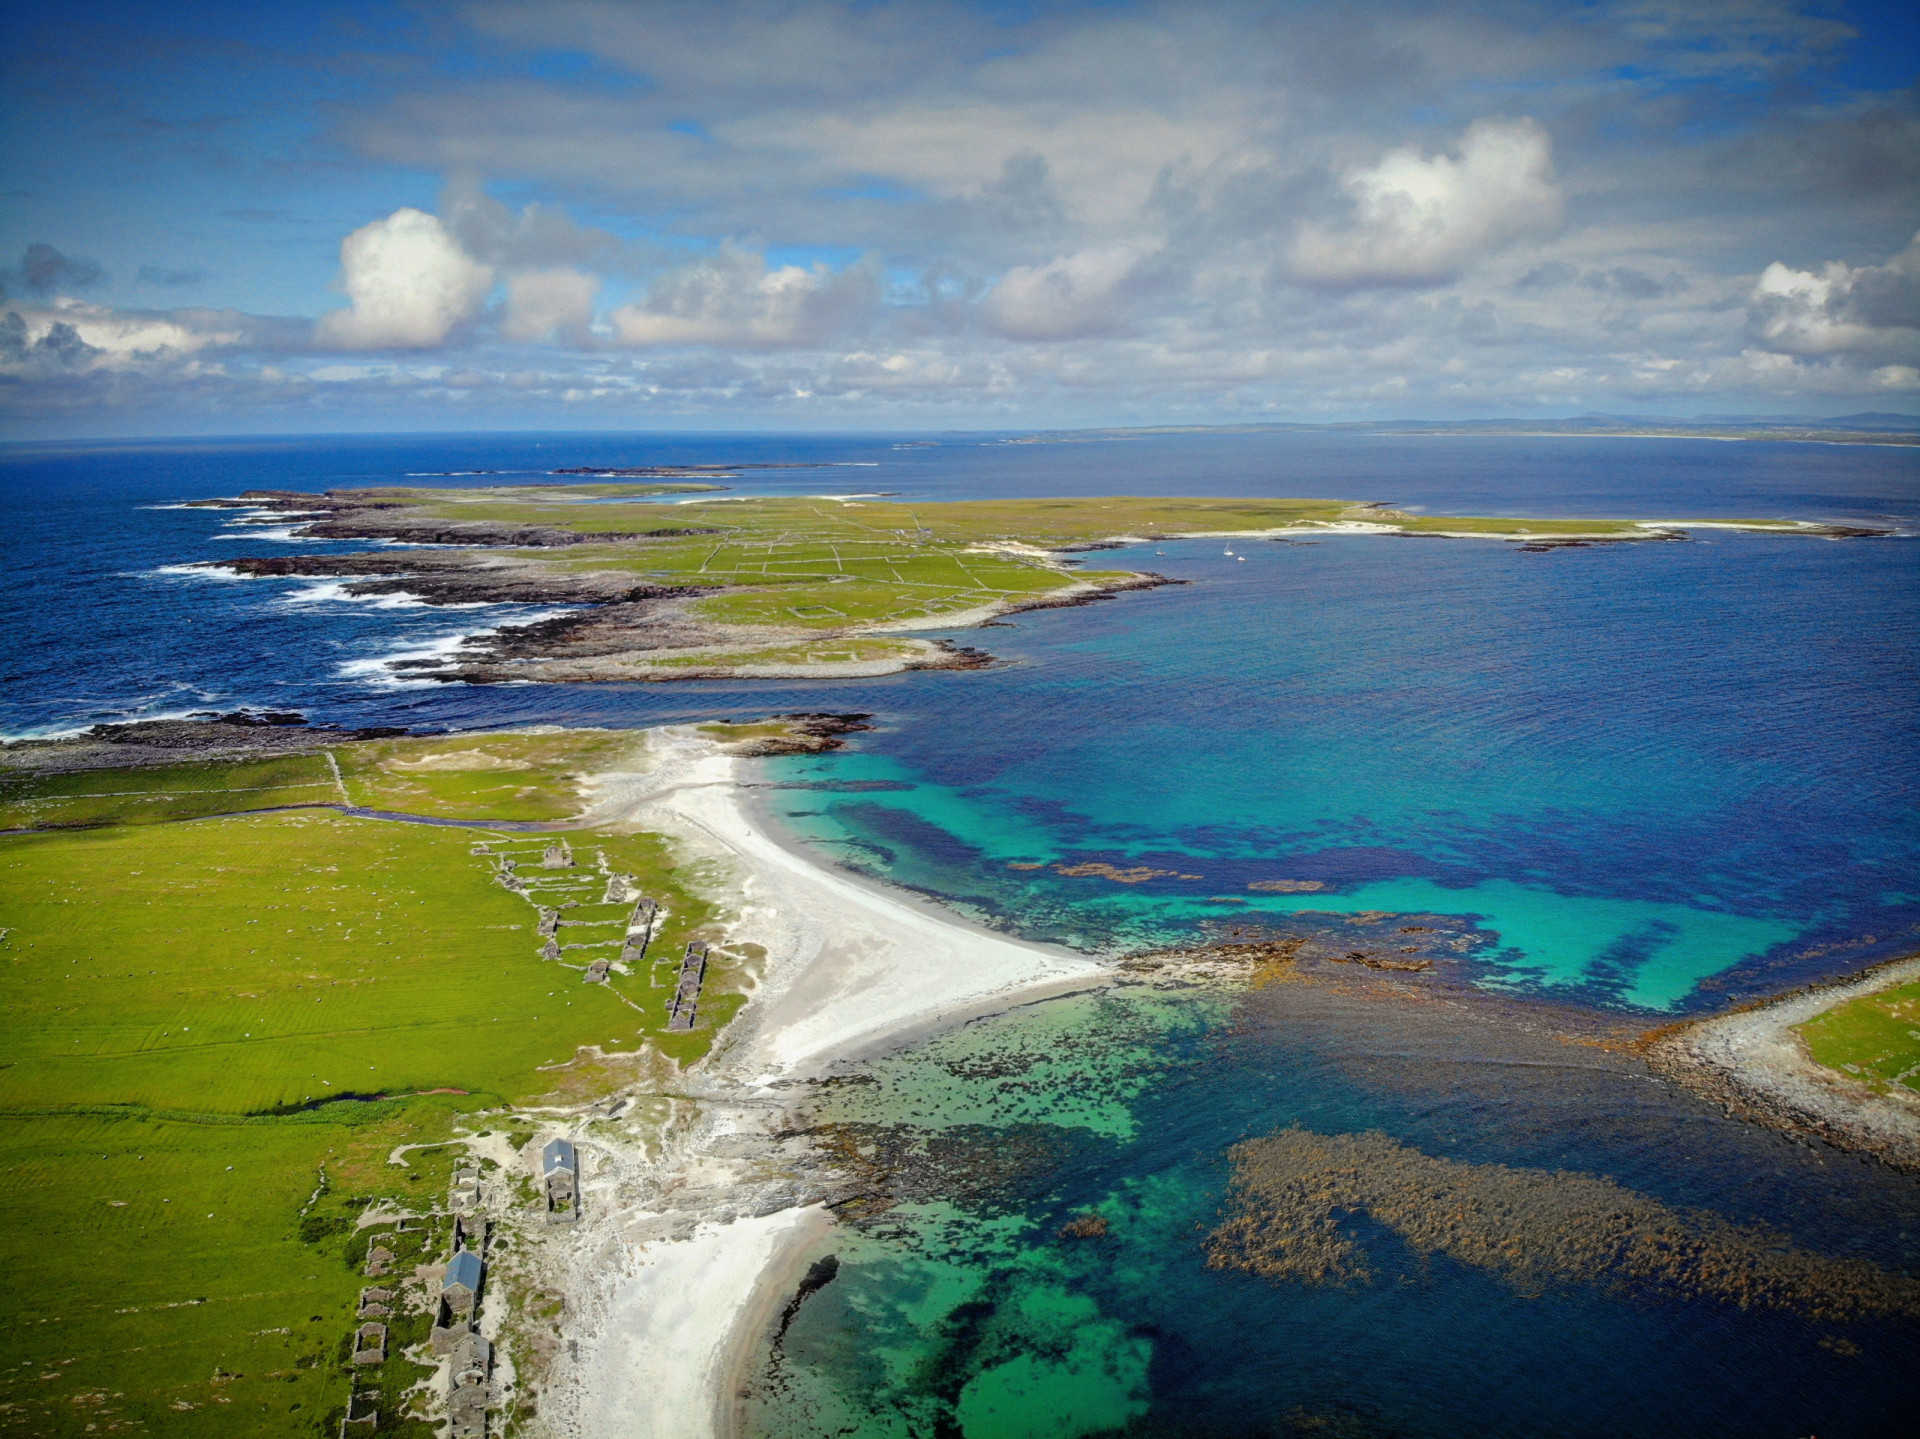 <p>The low-lying Inishkea islands lie off the coast of Belmullet, Co. Mayo. Home to a variety of bird species, seals, rabbits, sheep, and donkeys, the islands were last inhabited by people in the 1930s.</p>